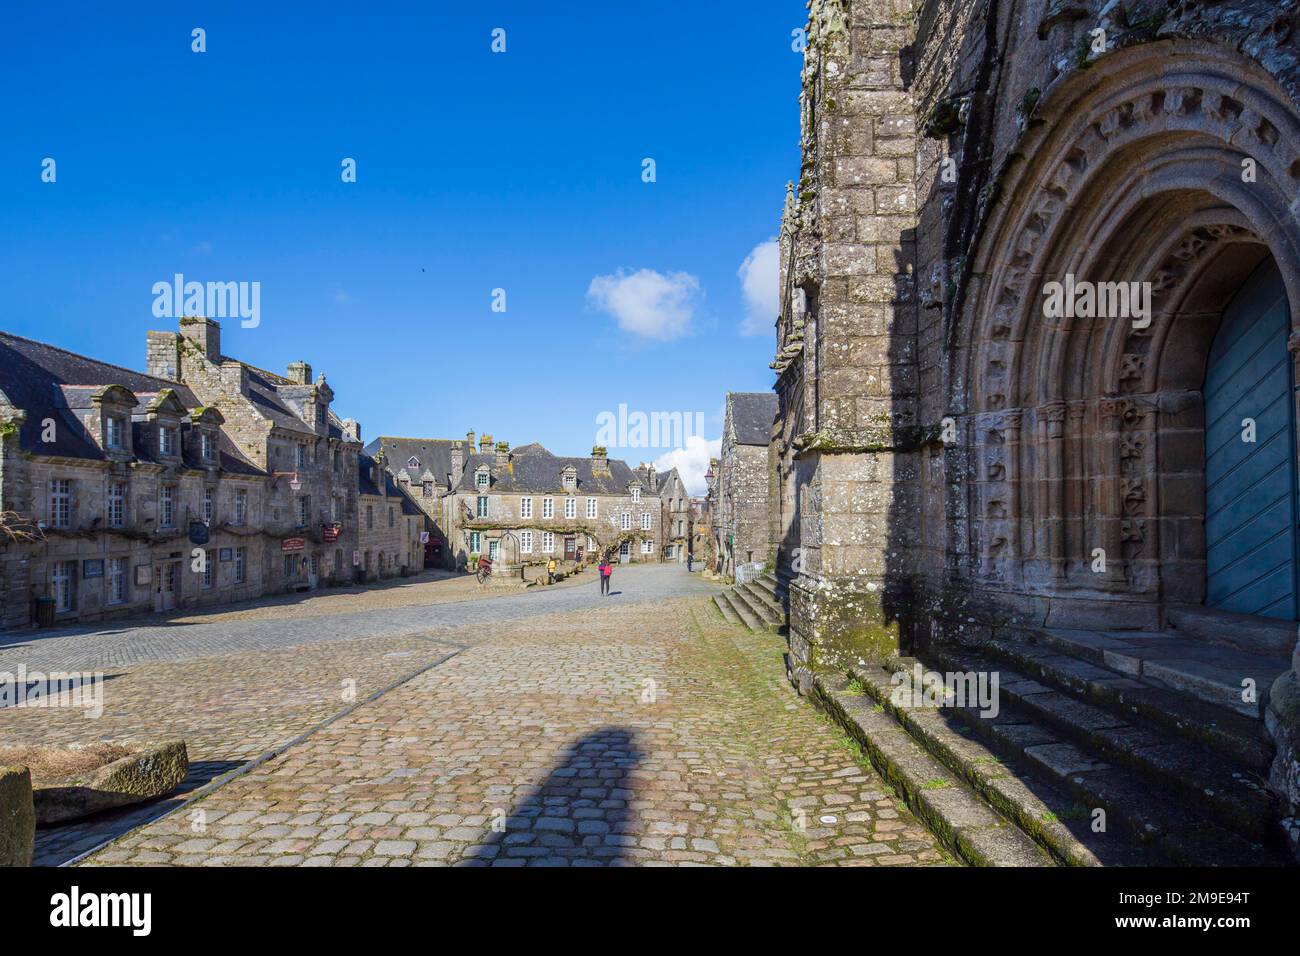 Locronan, named one of the most beautiful villages in France, Finistere department, Brittany region, France Stock Photo